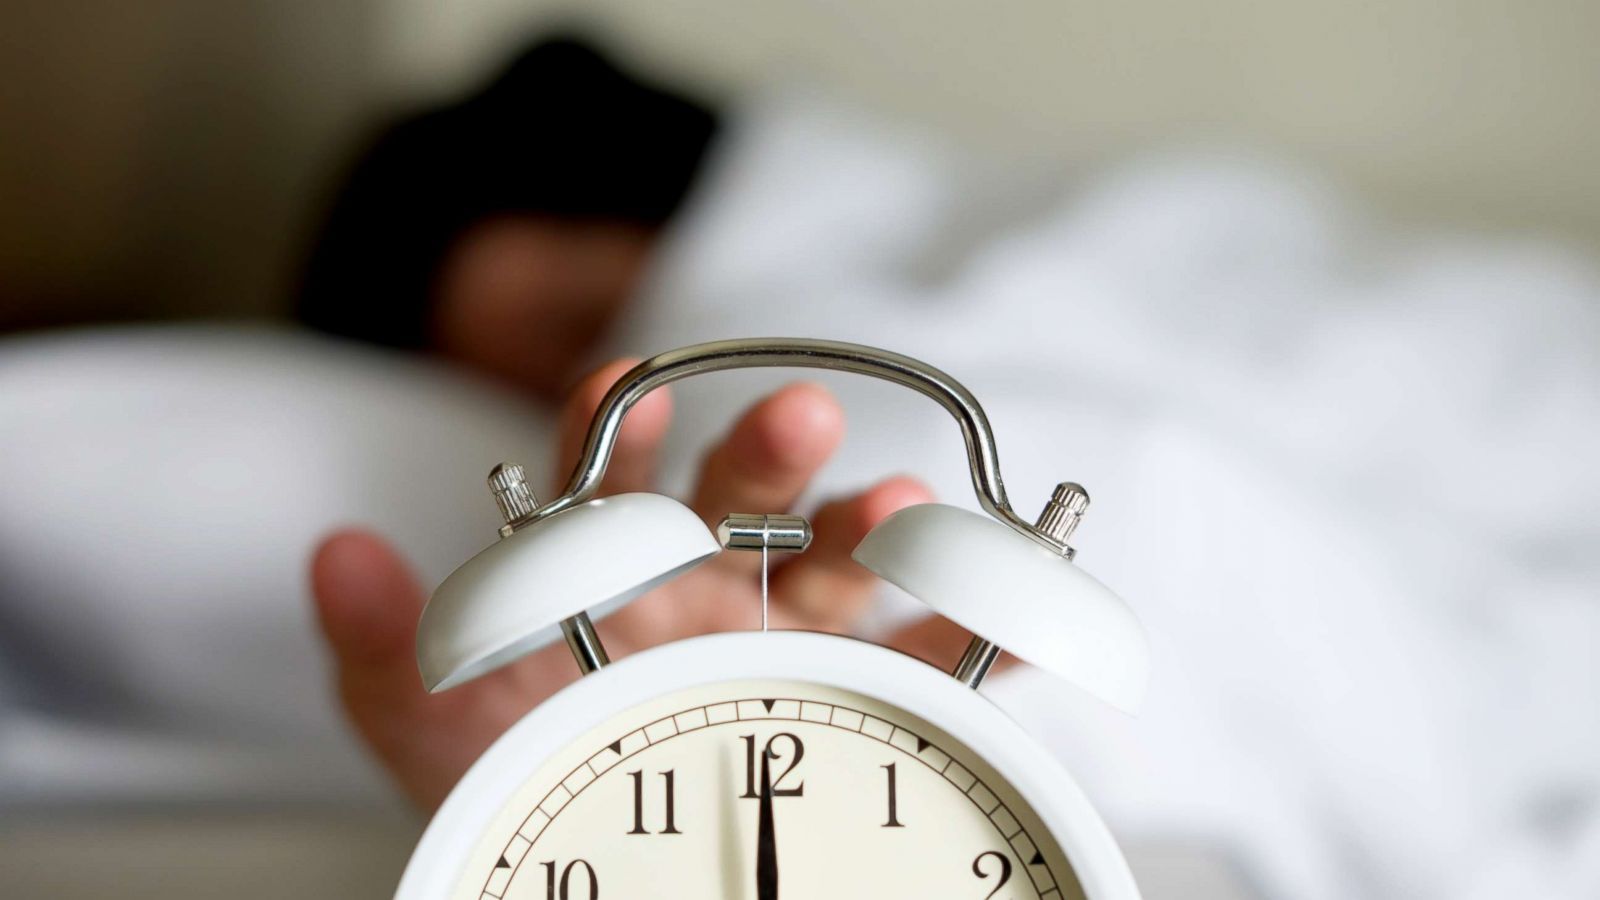 Daylight saving time 2019: How it affects your sleep, and tips to adjust losing an hour